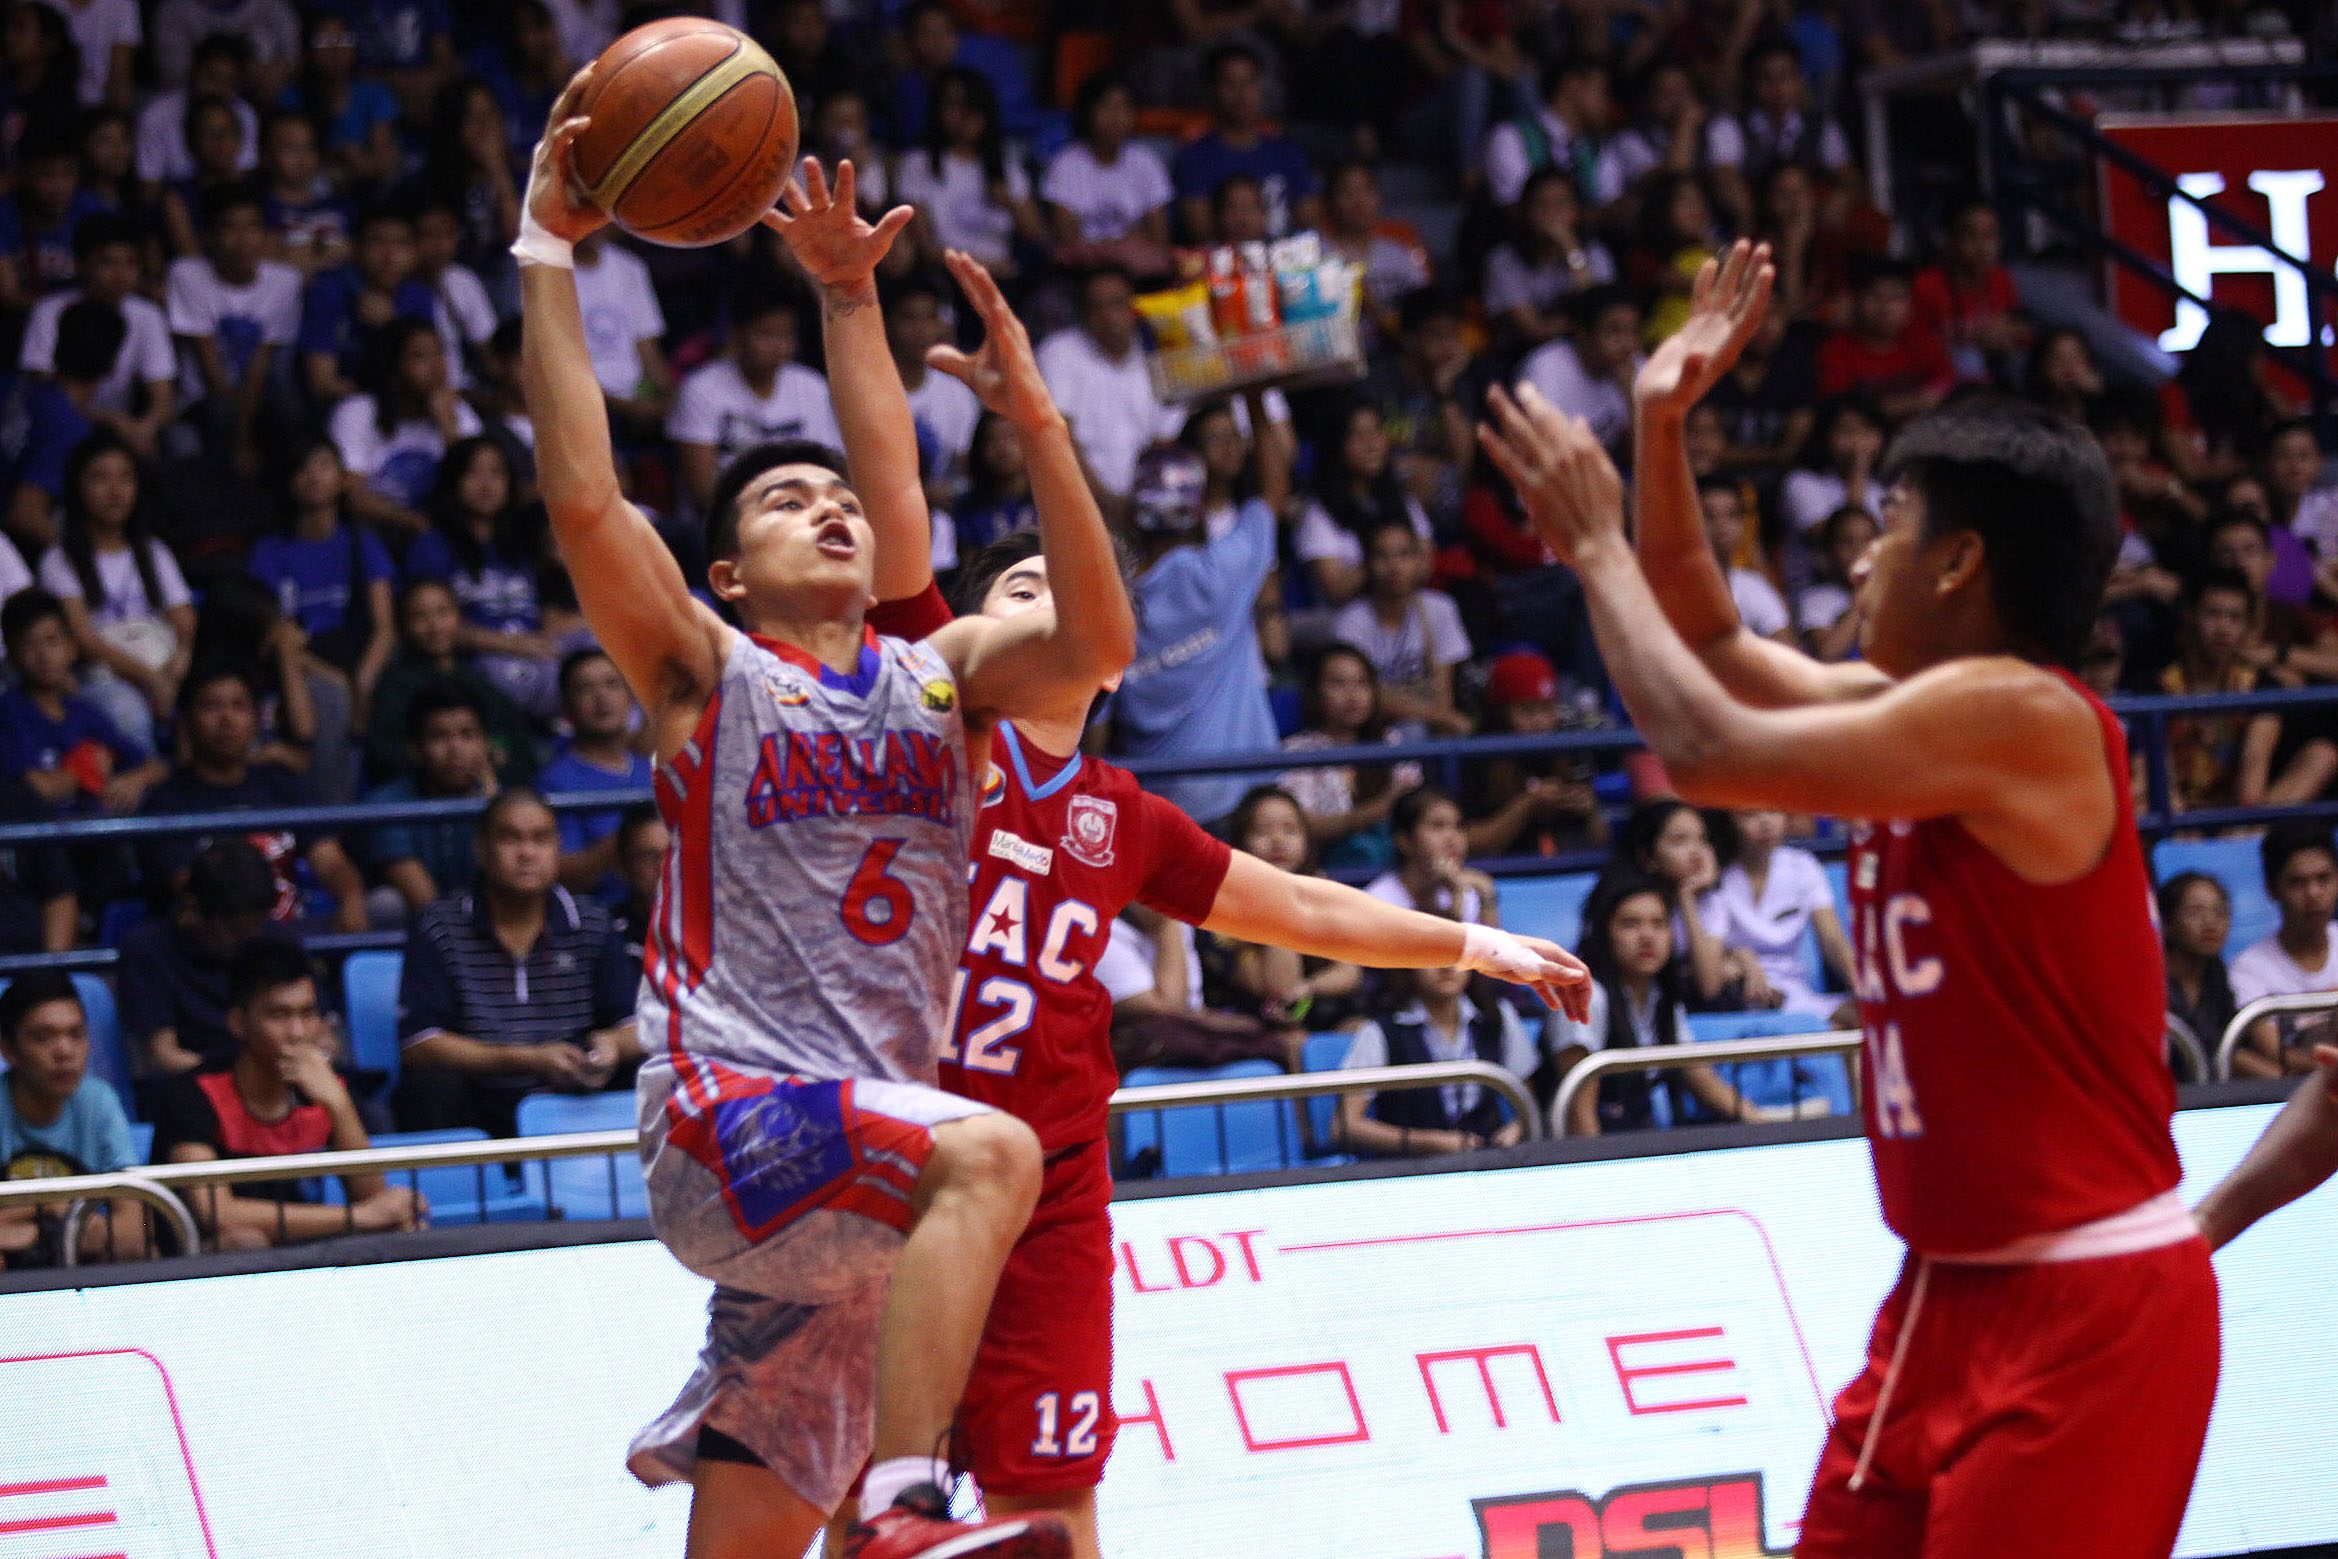 Arellano brushes off EAC to stay in race for Final Four berth